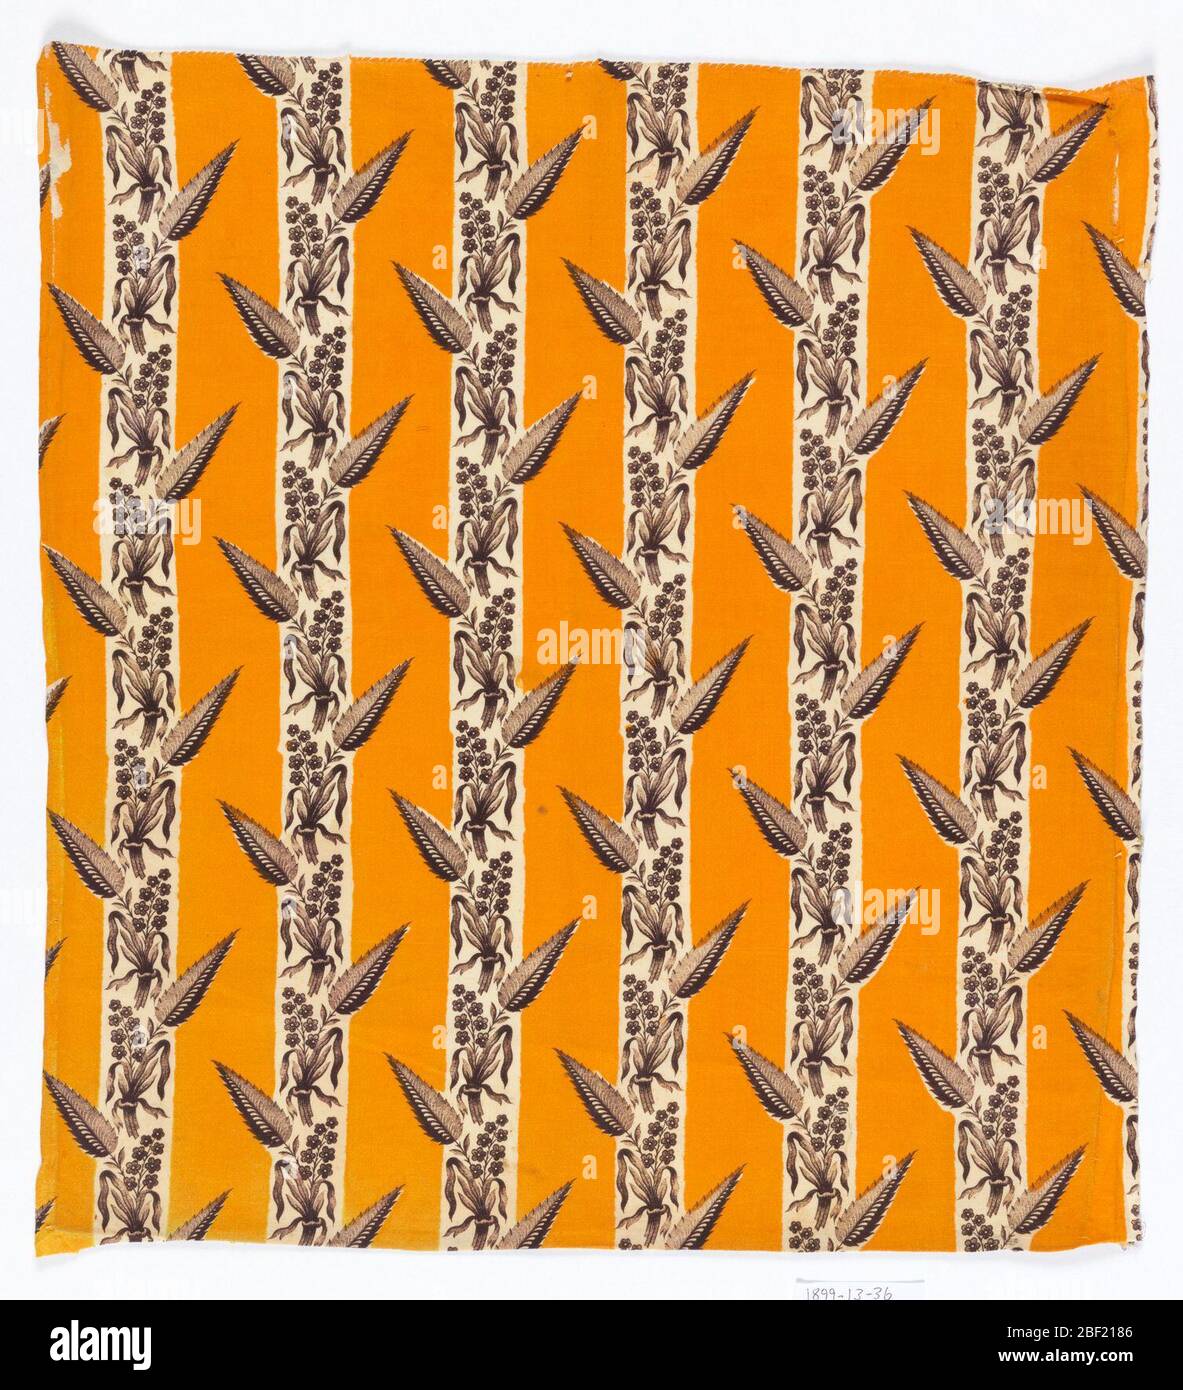 Textile. Alternate stripes of chrome orange (solid) and brown floral sprays with saw-toothed leaf. Stock Photo